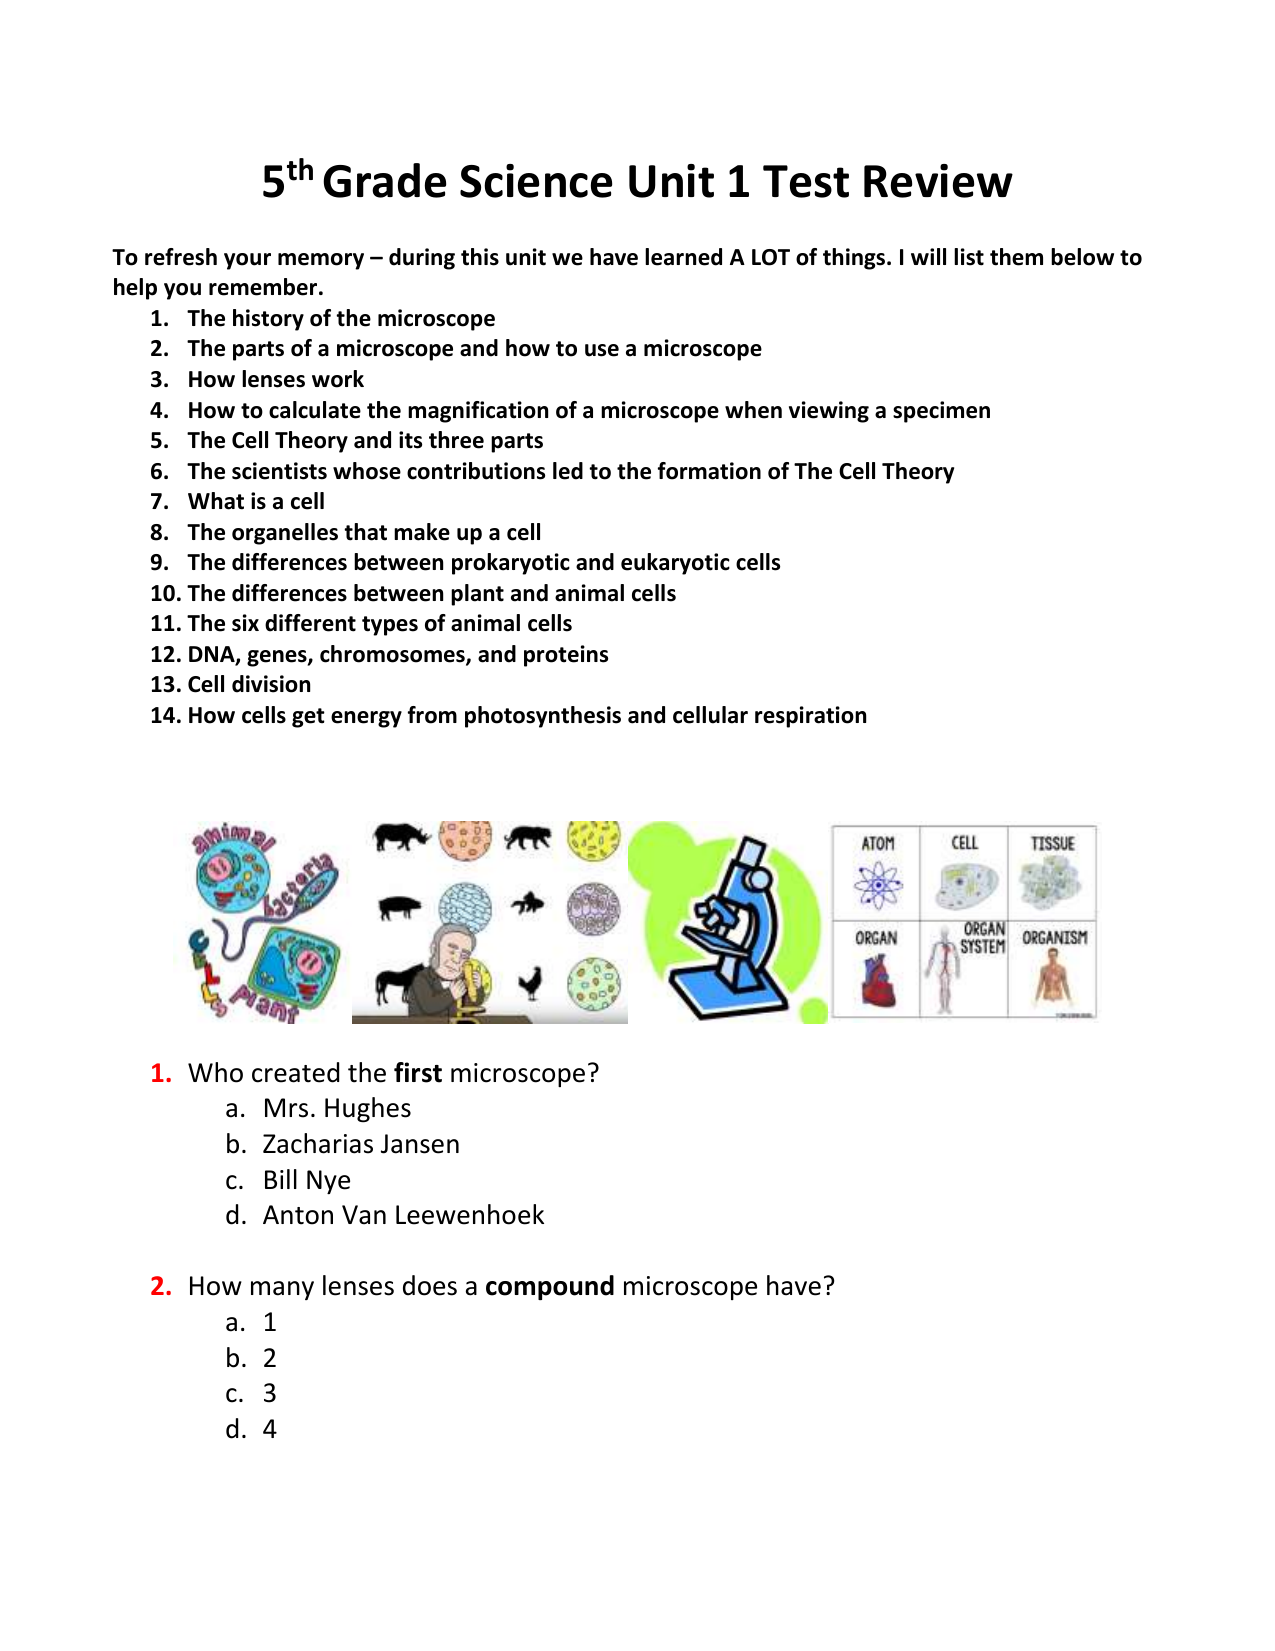 5th-grade-science-unit-1-test-review